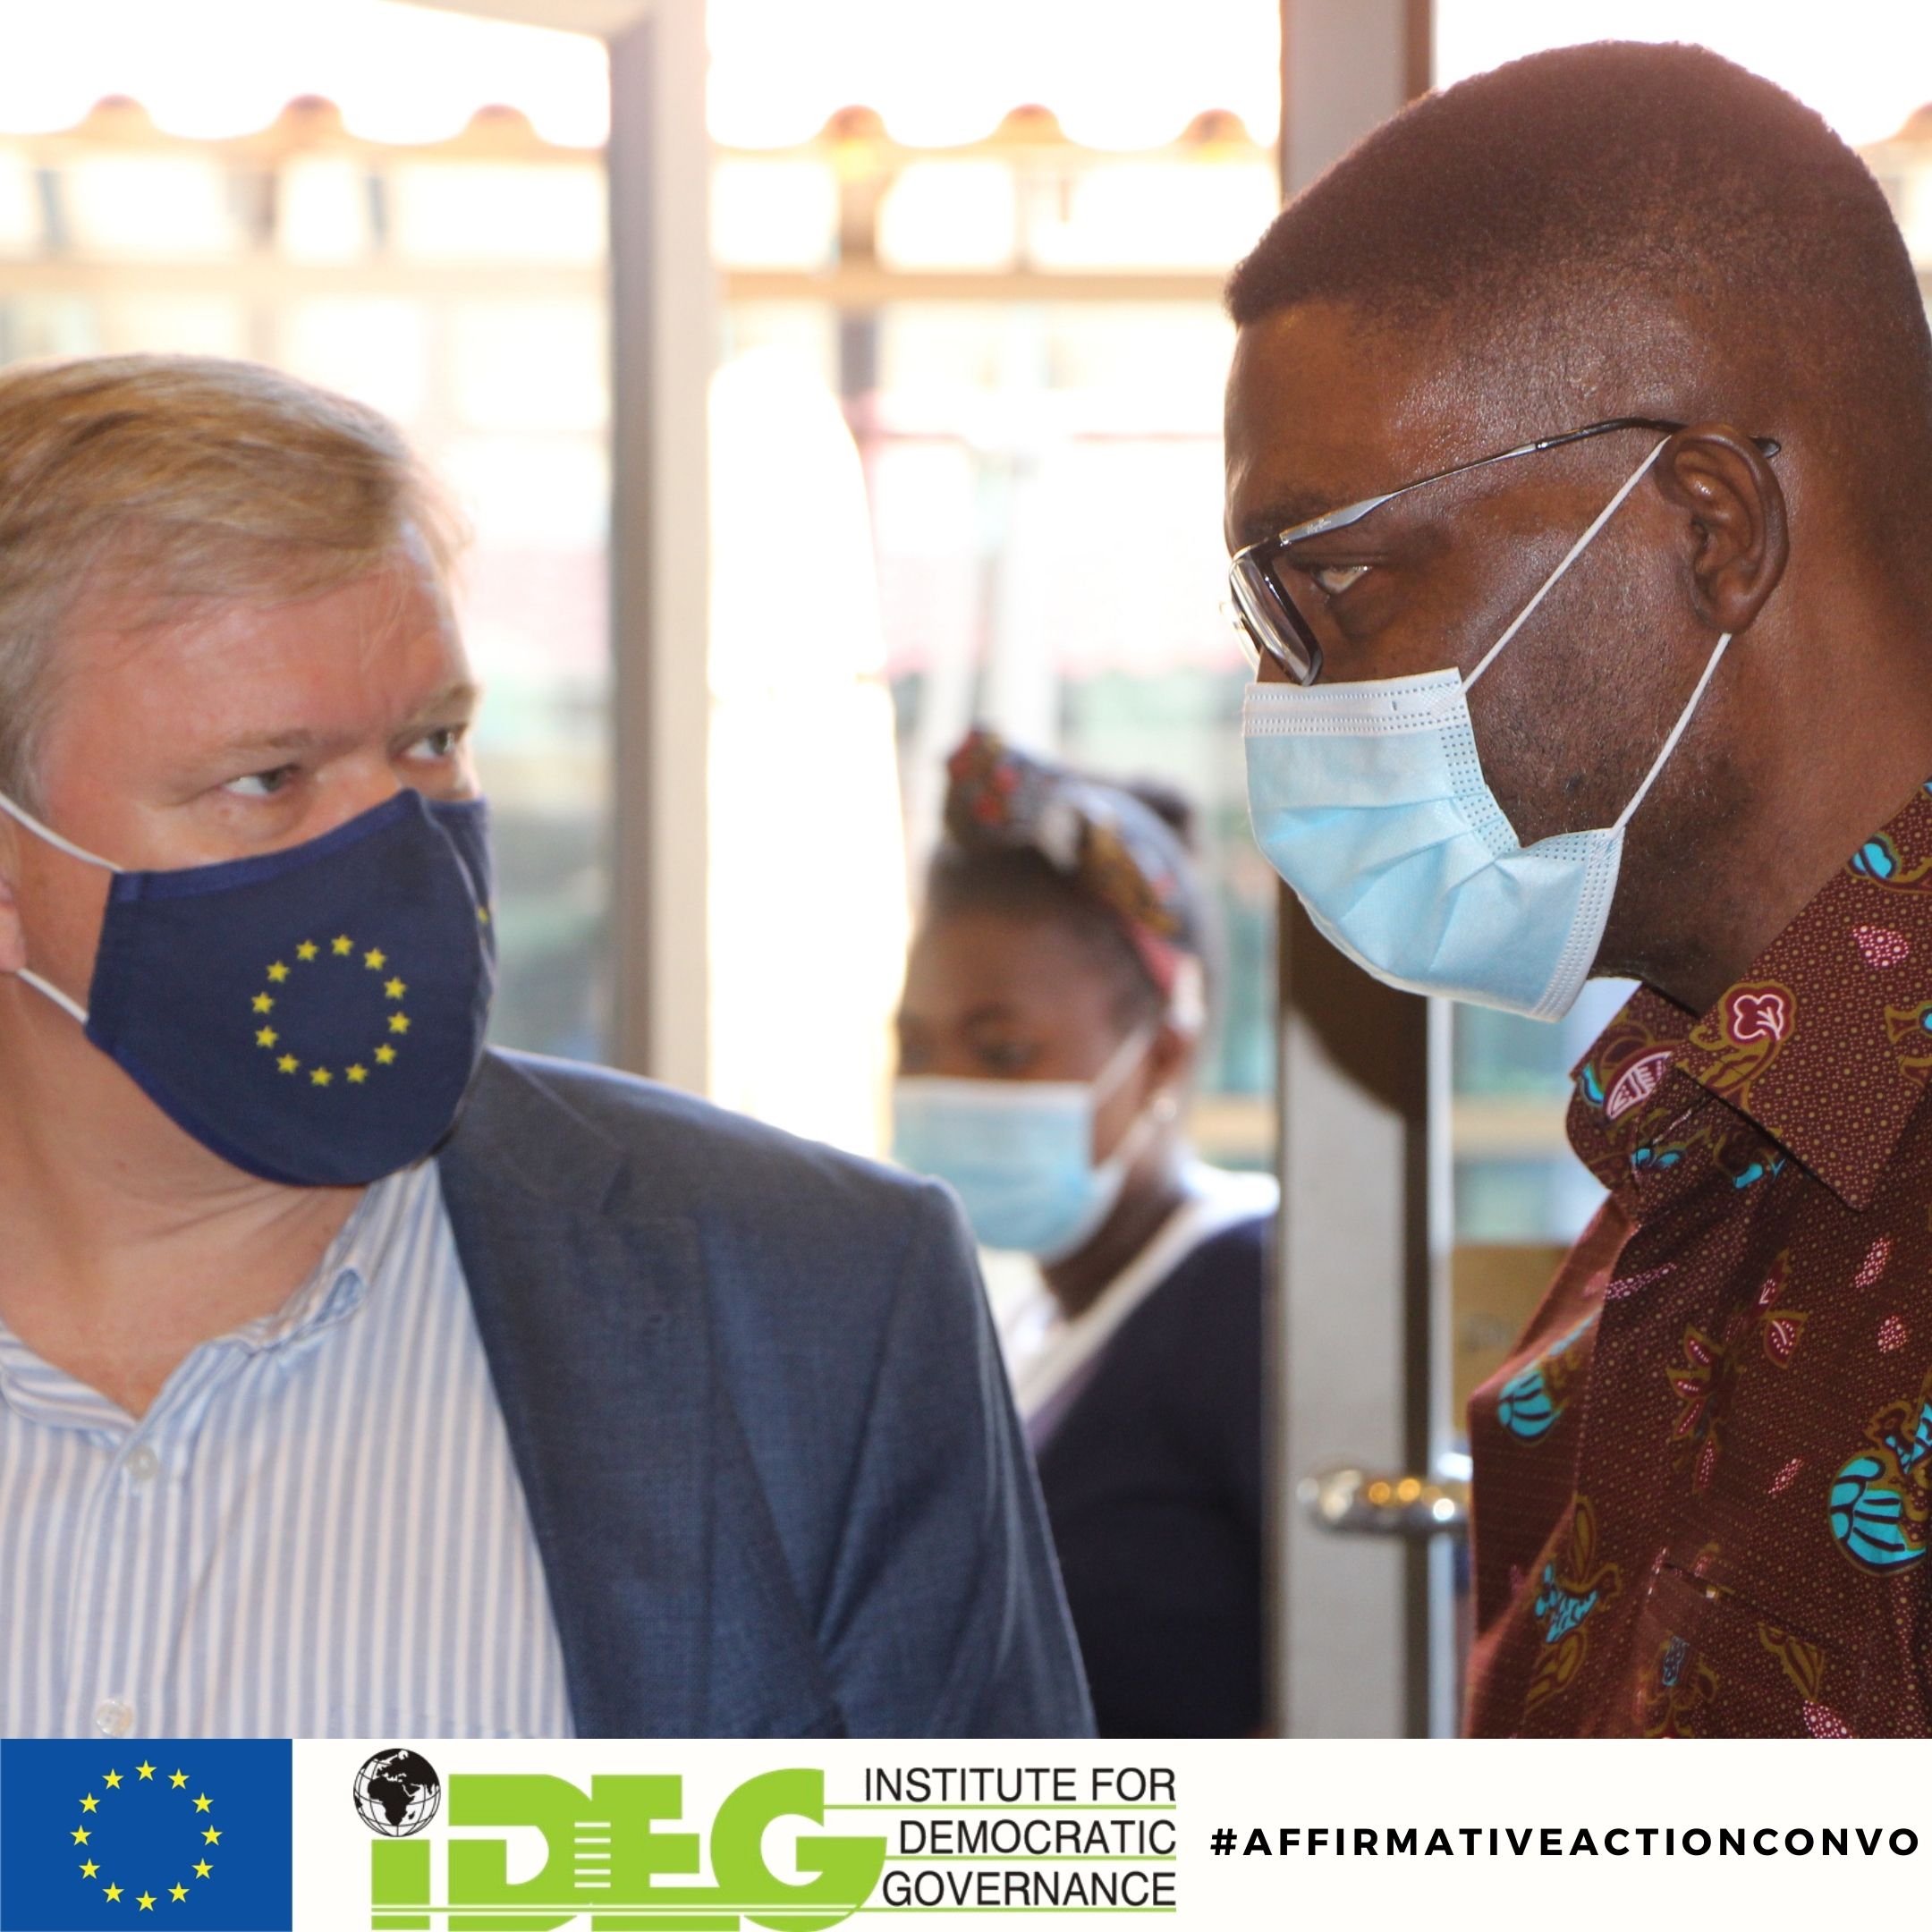 European Union in Ghana and IDEG encourage women's inclusion in governance, at an event in Accra